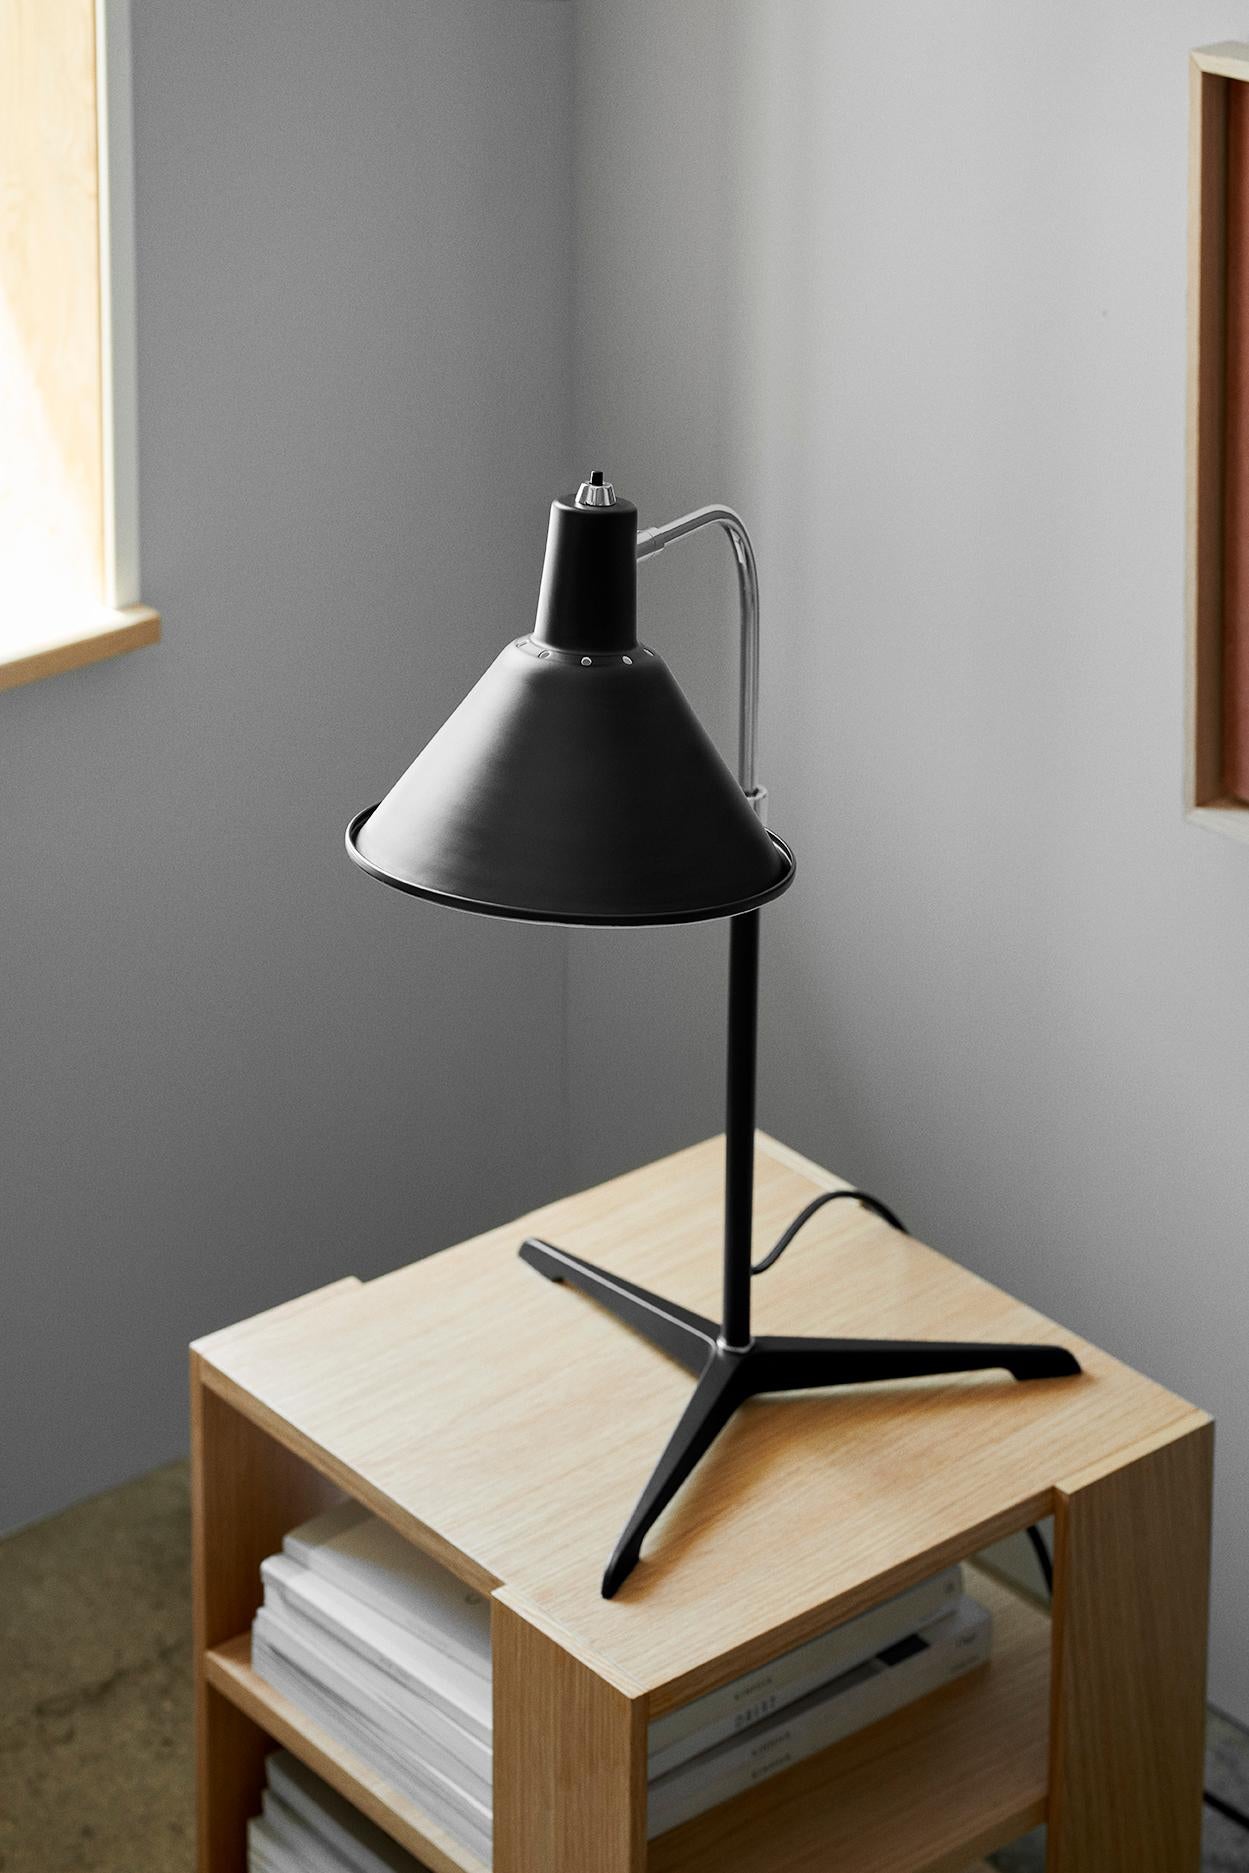 Plated Arcon Table Lamp in Black/Chrome - By NUAD For Sale